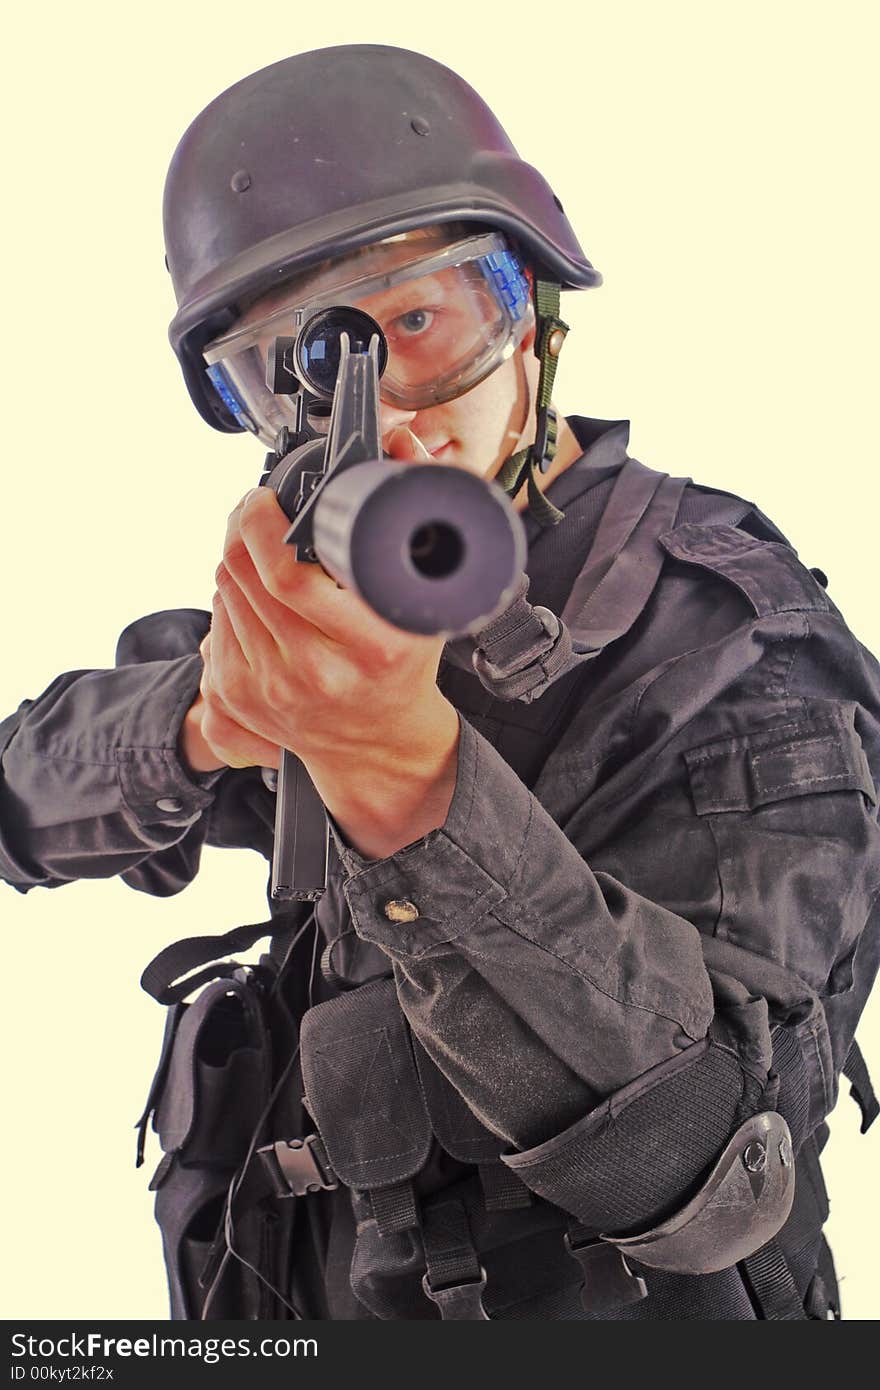 Shot of a soldier holding gun. Uniform conforms to special services(soldiers) of the NATO countries. Shot of a soldier holding gun. Uniform conforms to special services(soldiers) of the NATO countries.